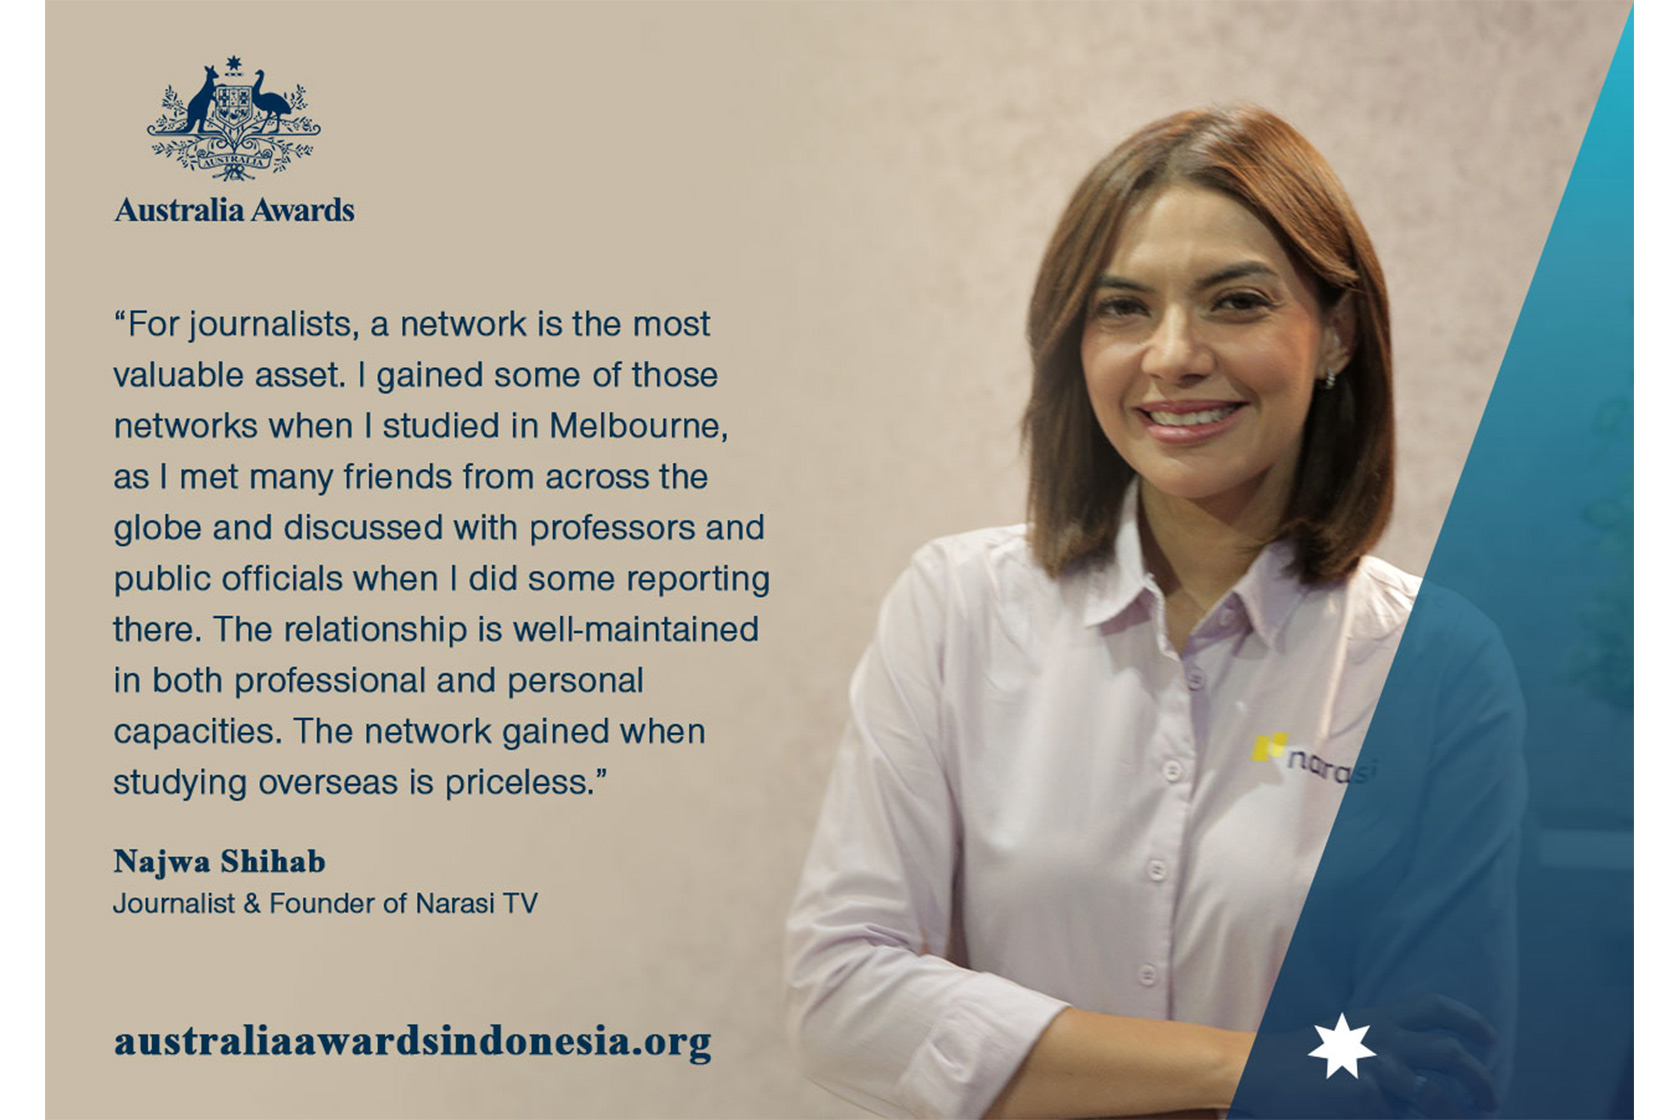 A testimonial from Najwa Shihab about her experience studying and living in Australia